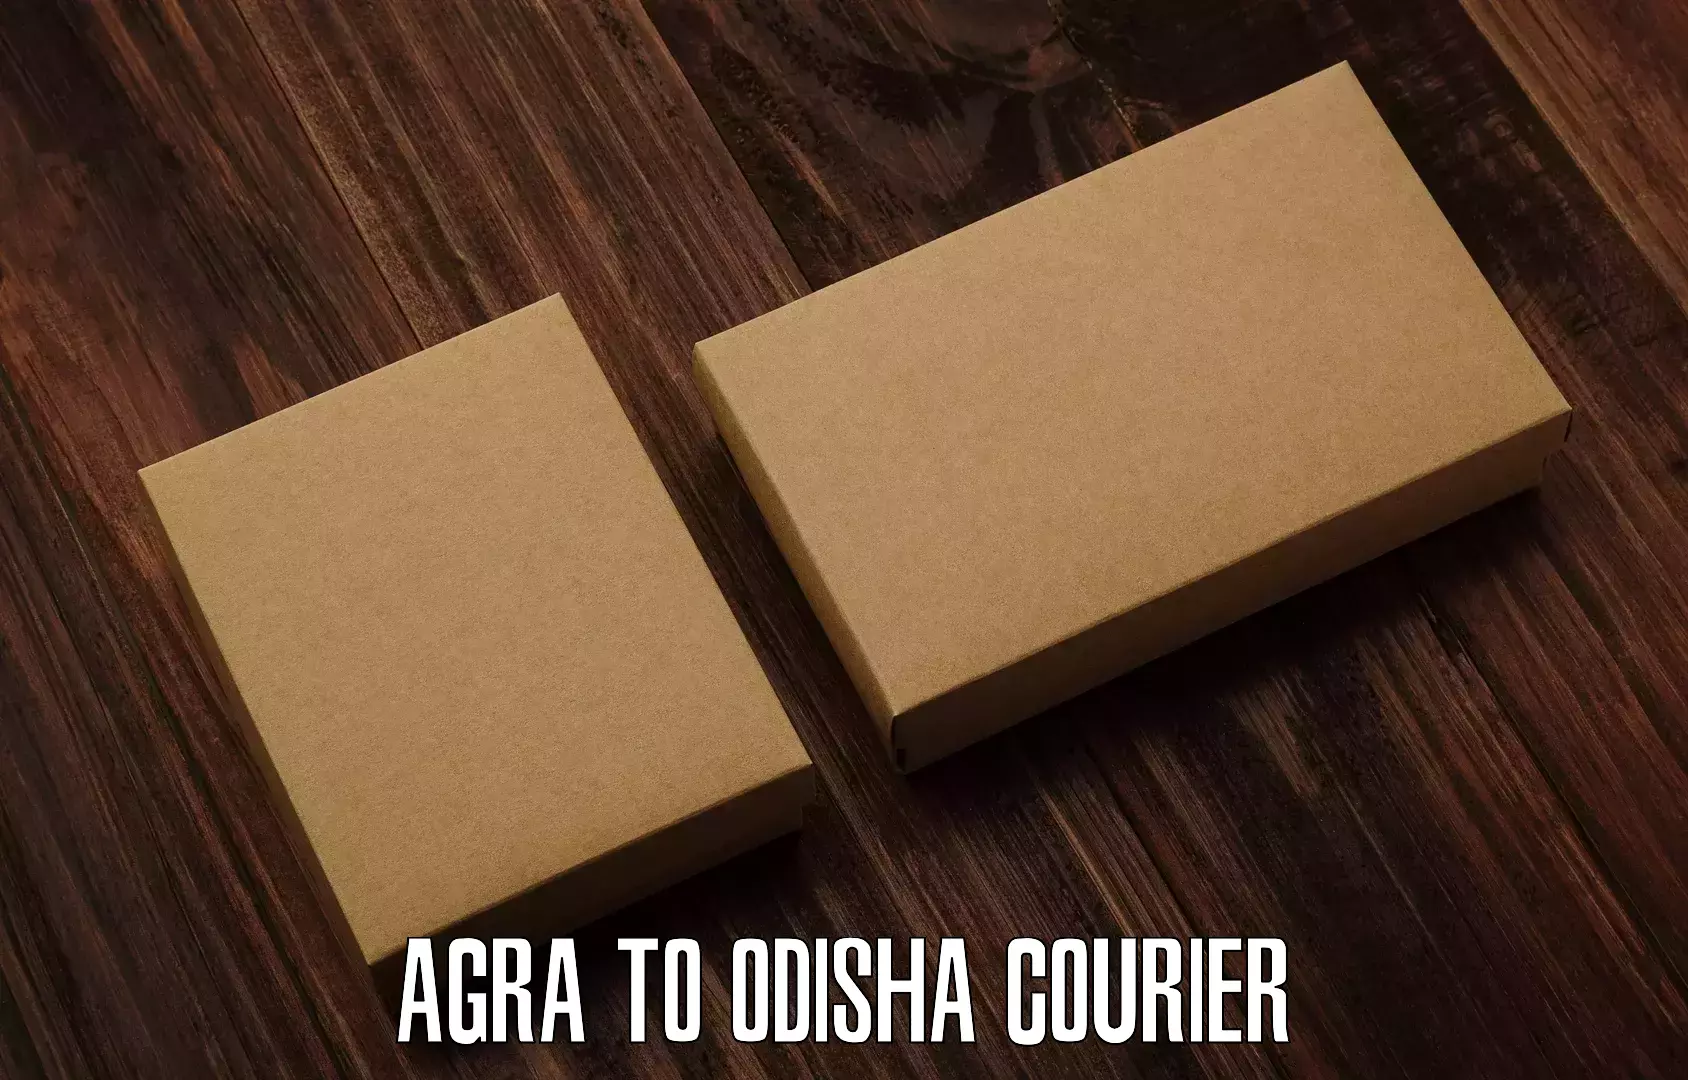 Cargo delivery service Agra to Dandisahi